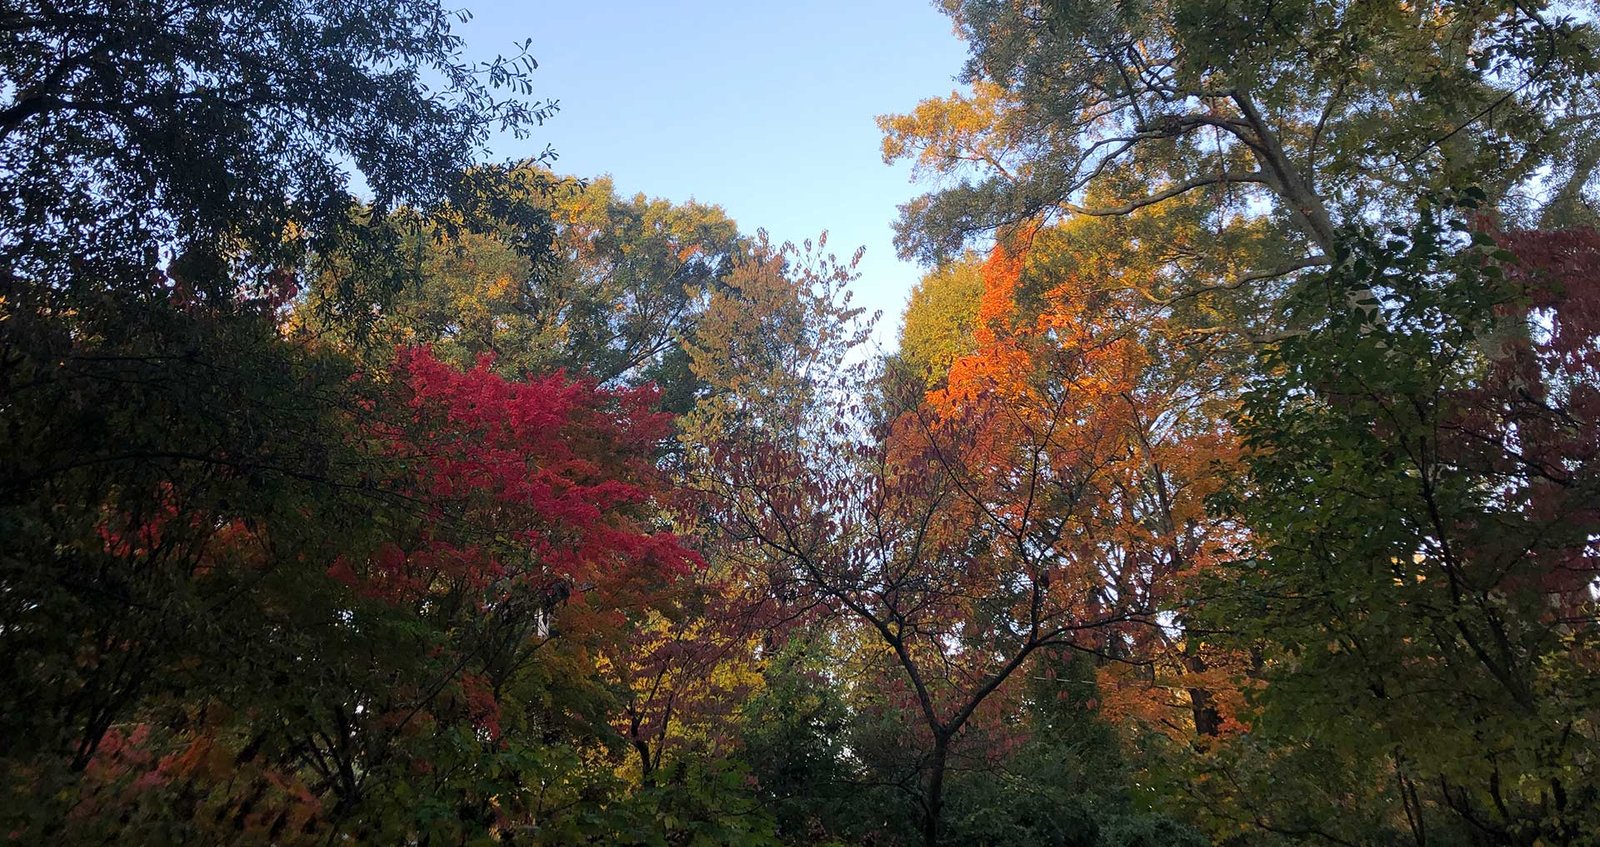 Tree canopy with fall colors